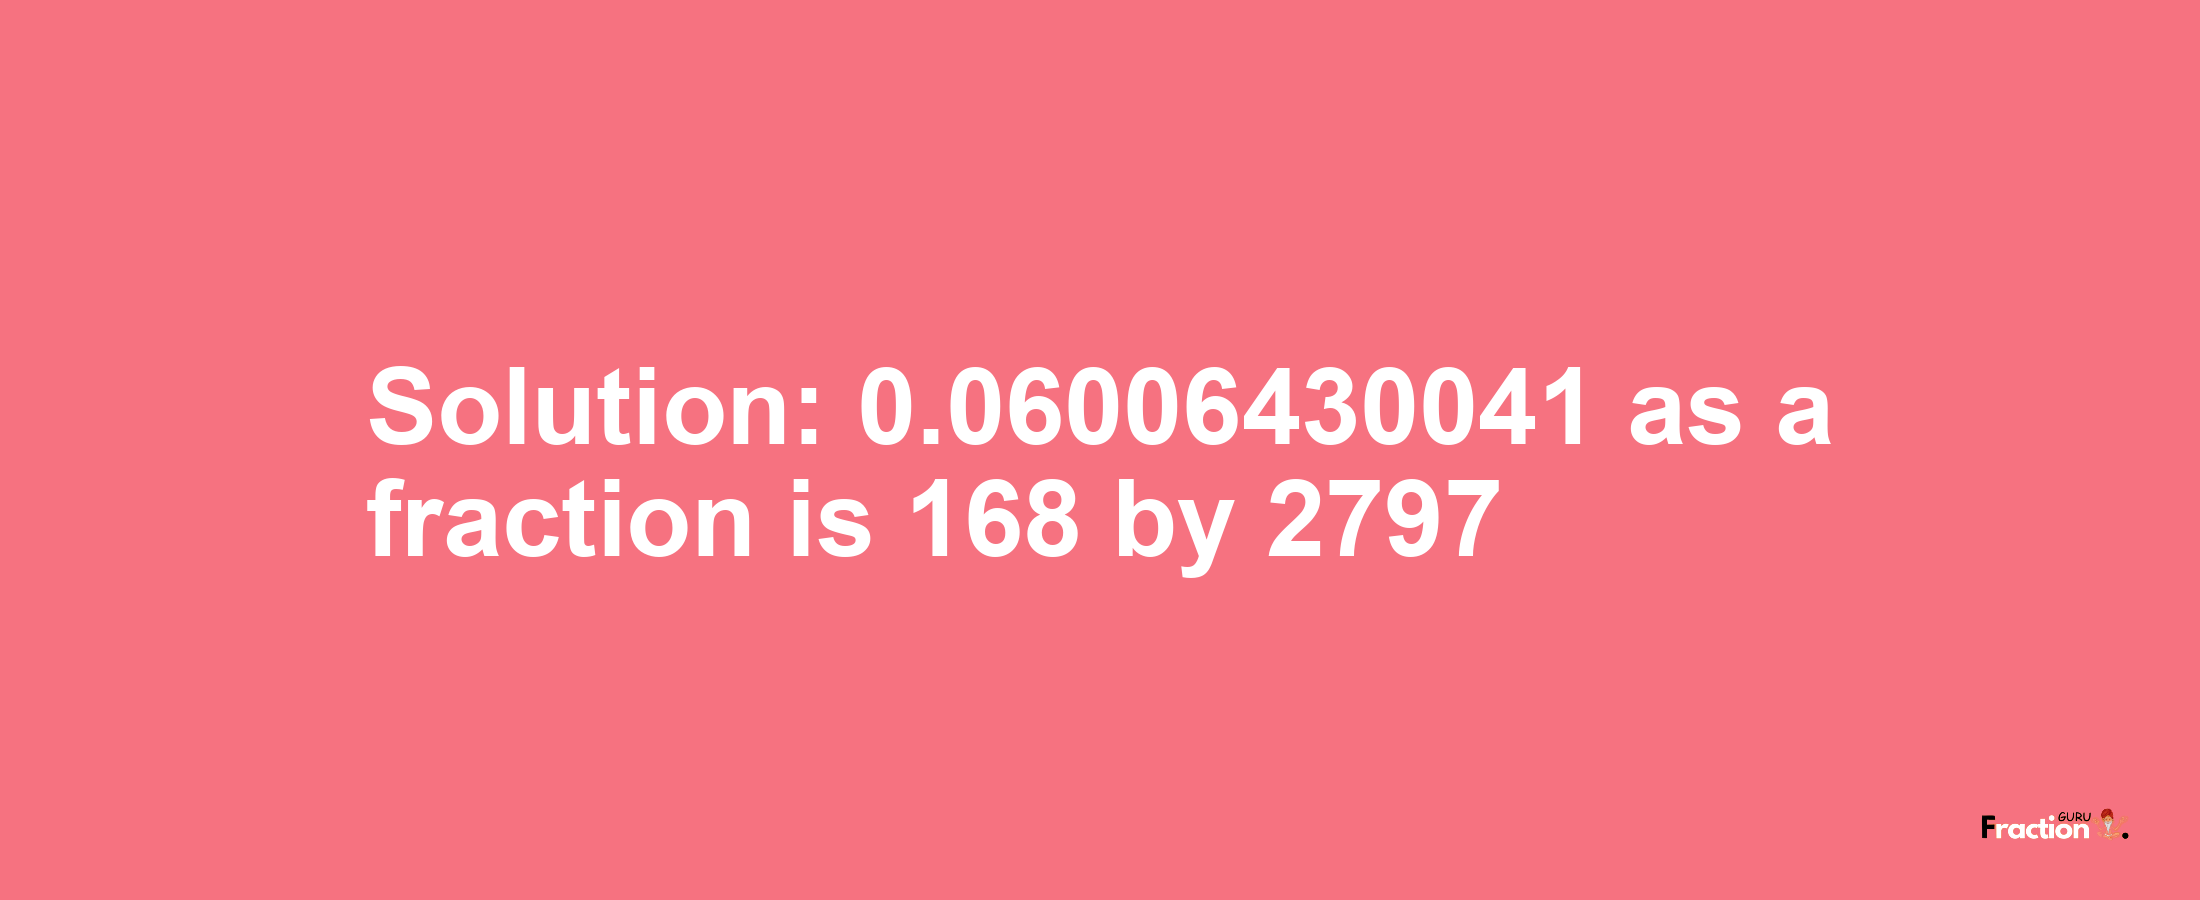 Solution:0.06006430041 as a fraction is 168/2797